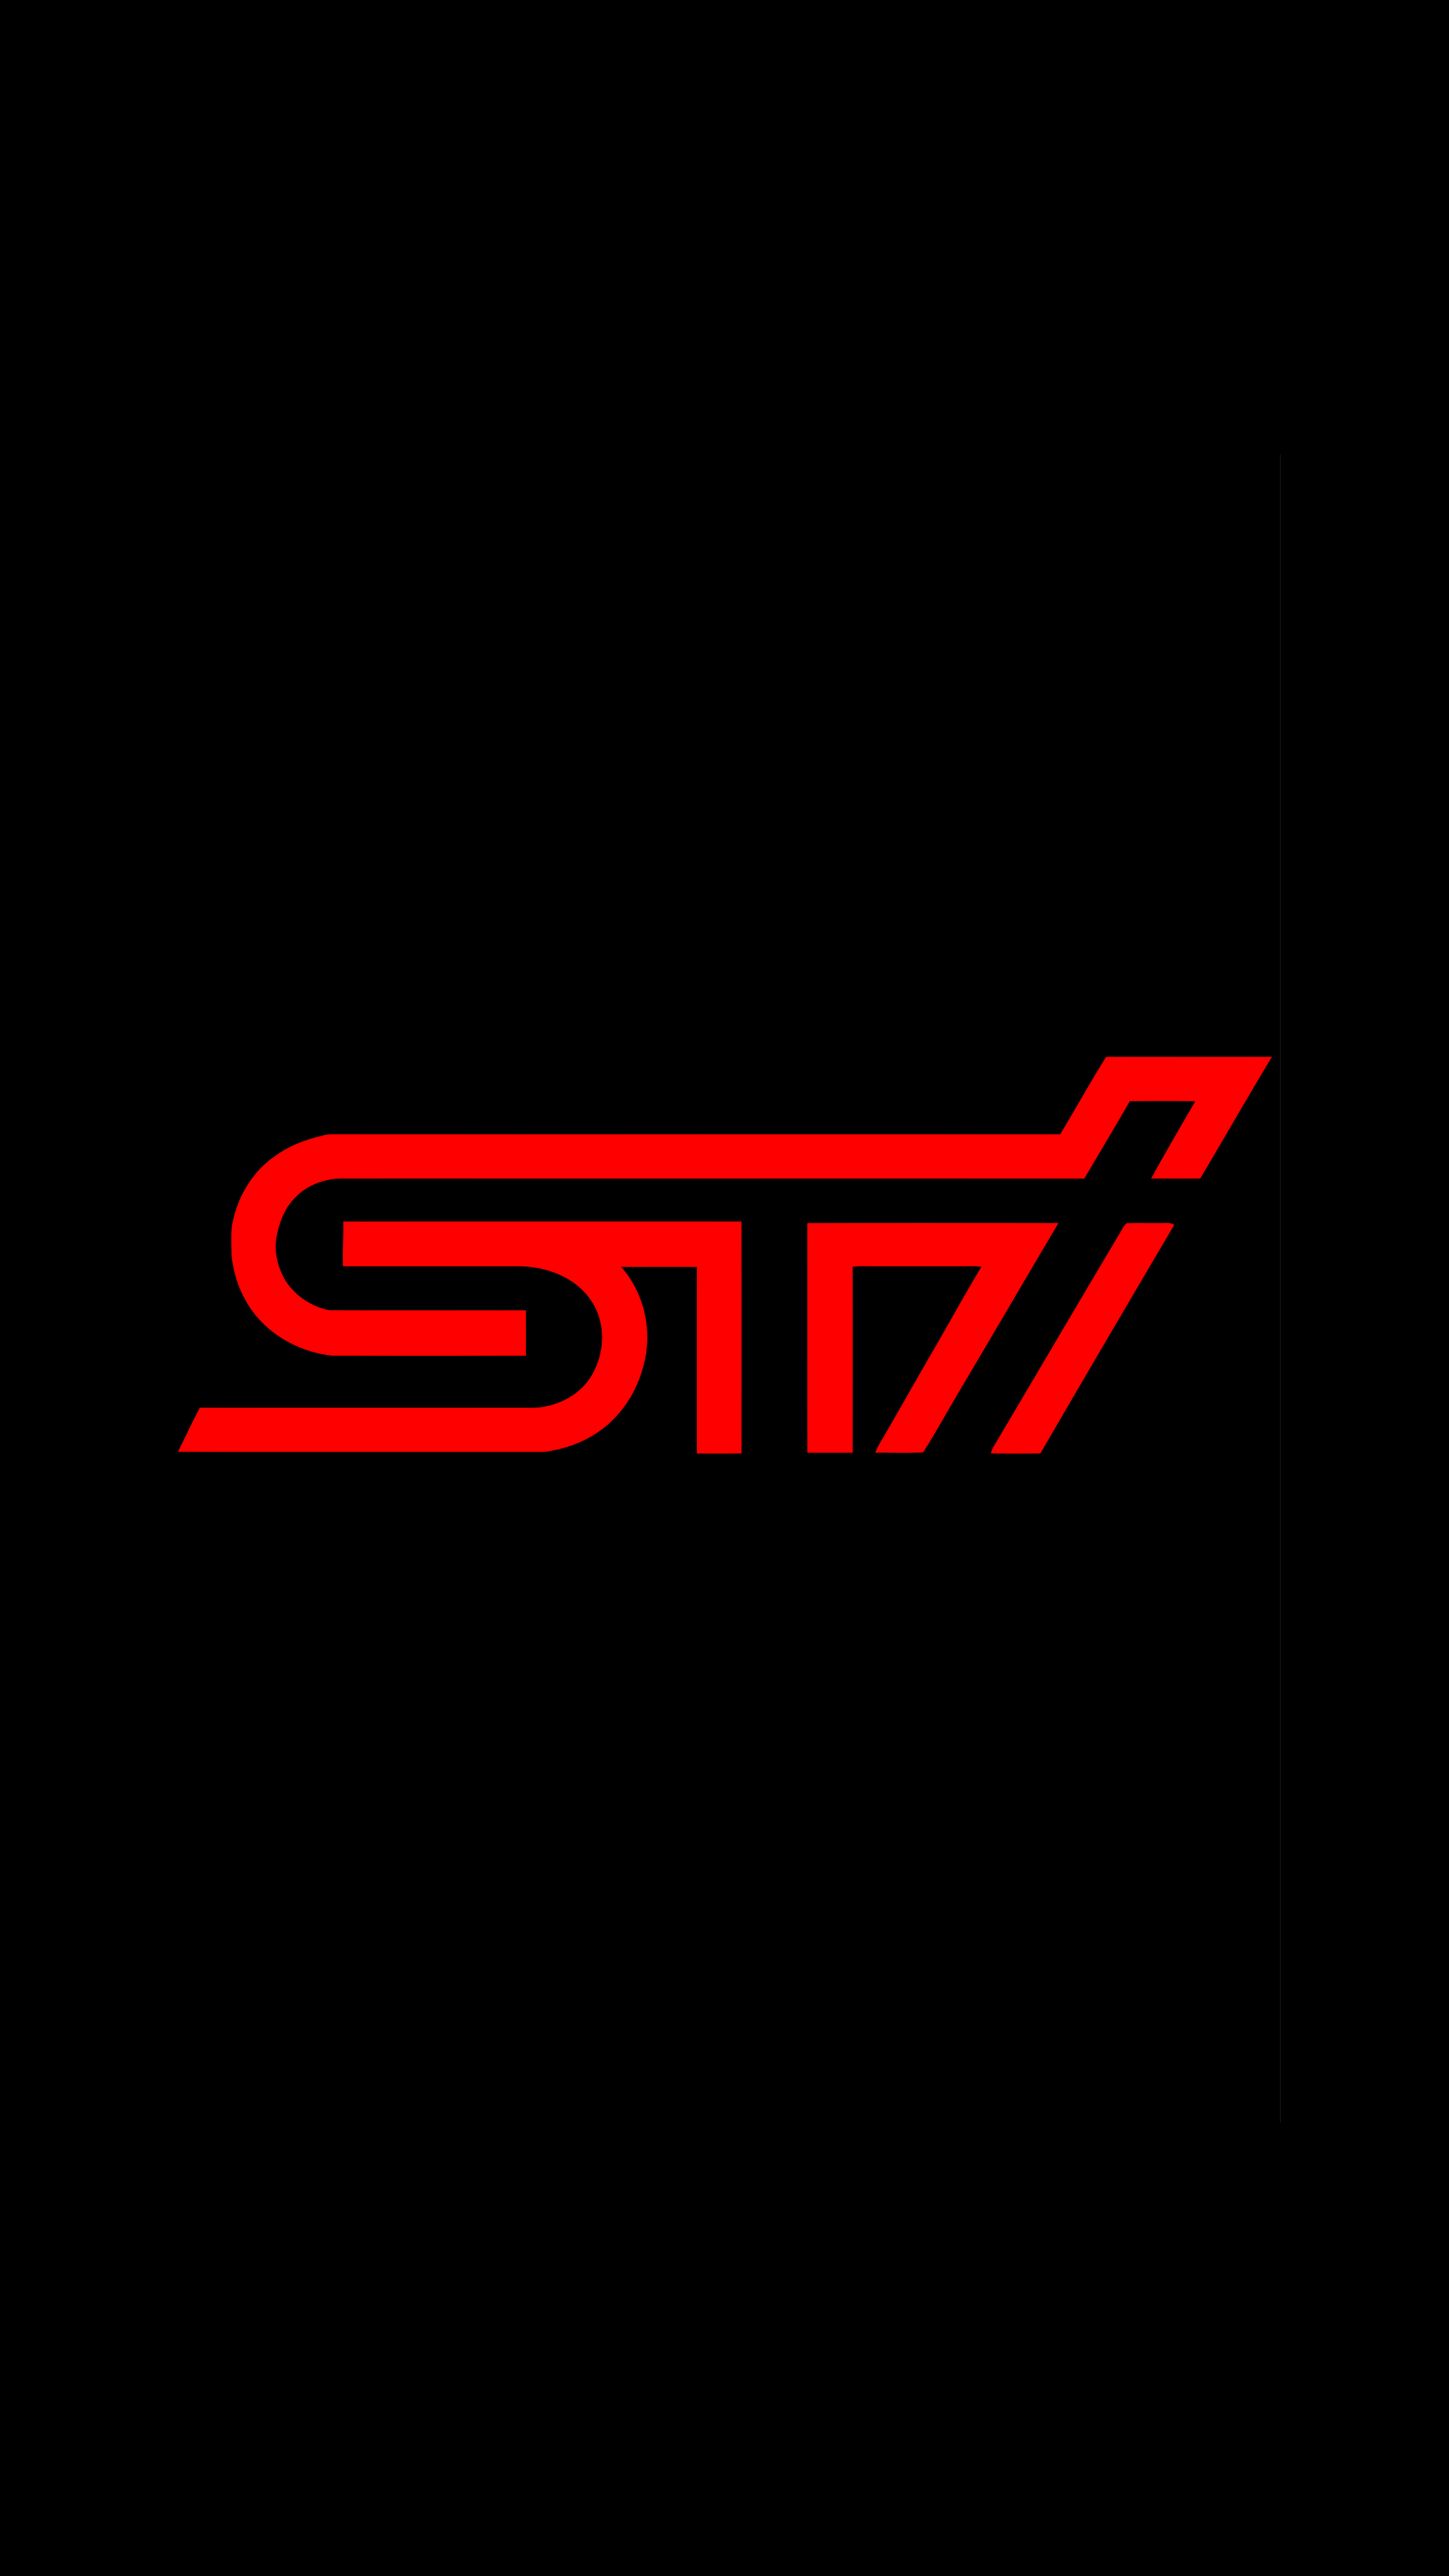 I Made This Sti Wallpaper For A Request On Another Sub Was Told